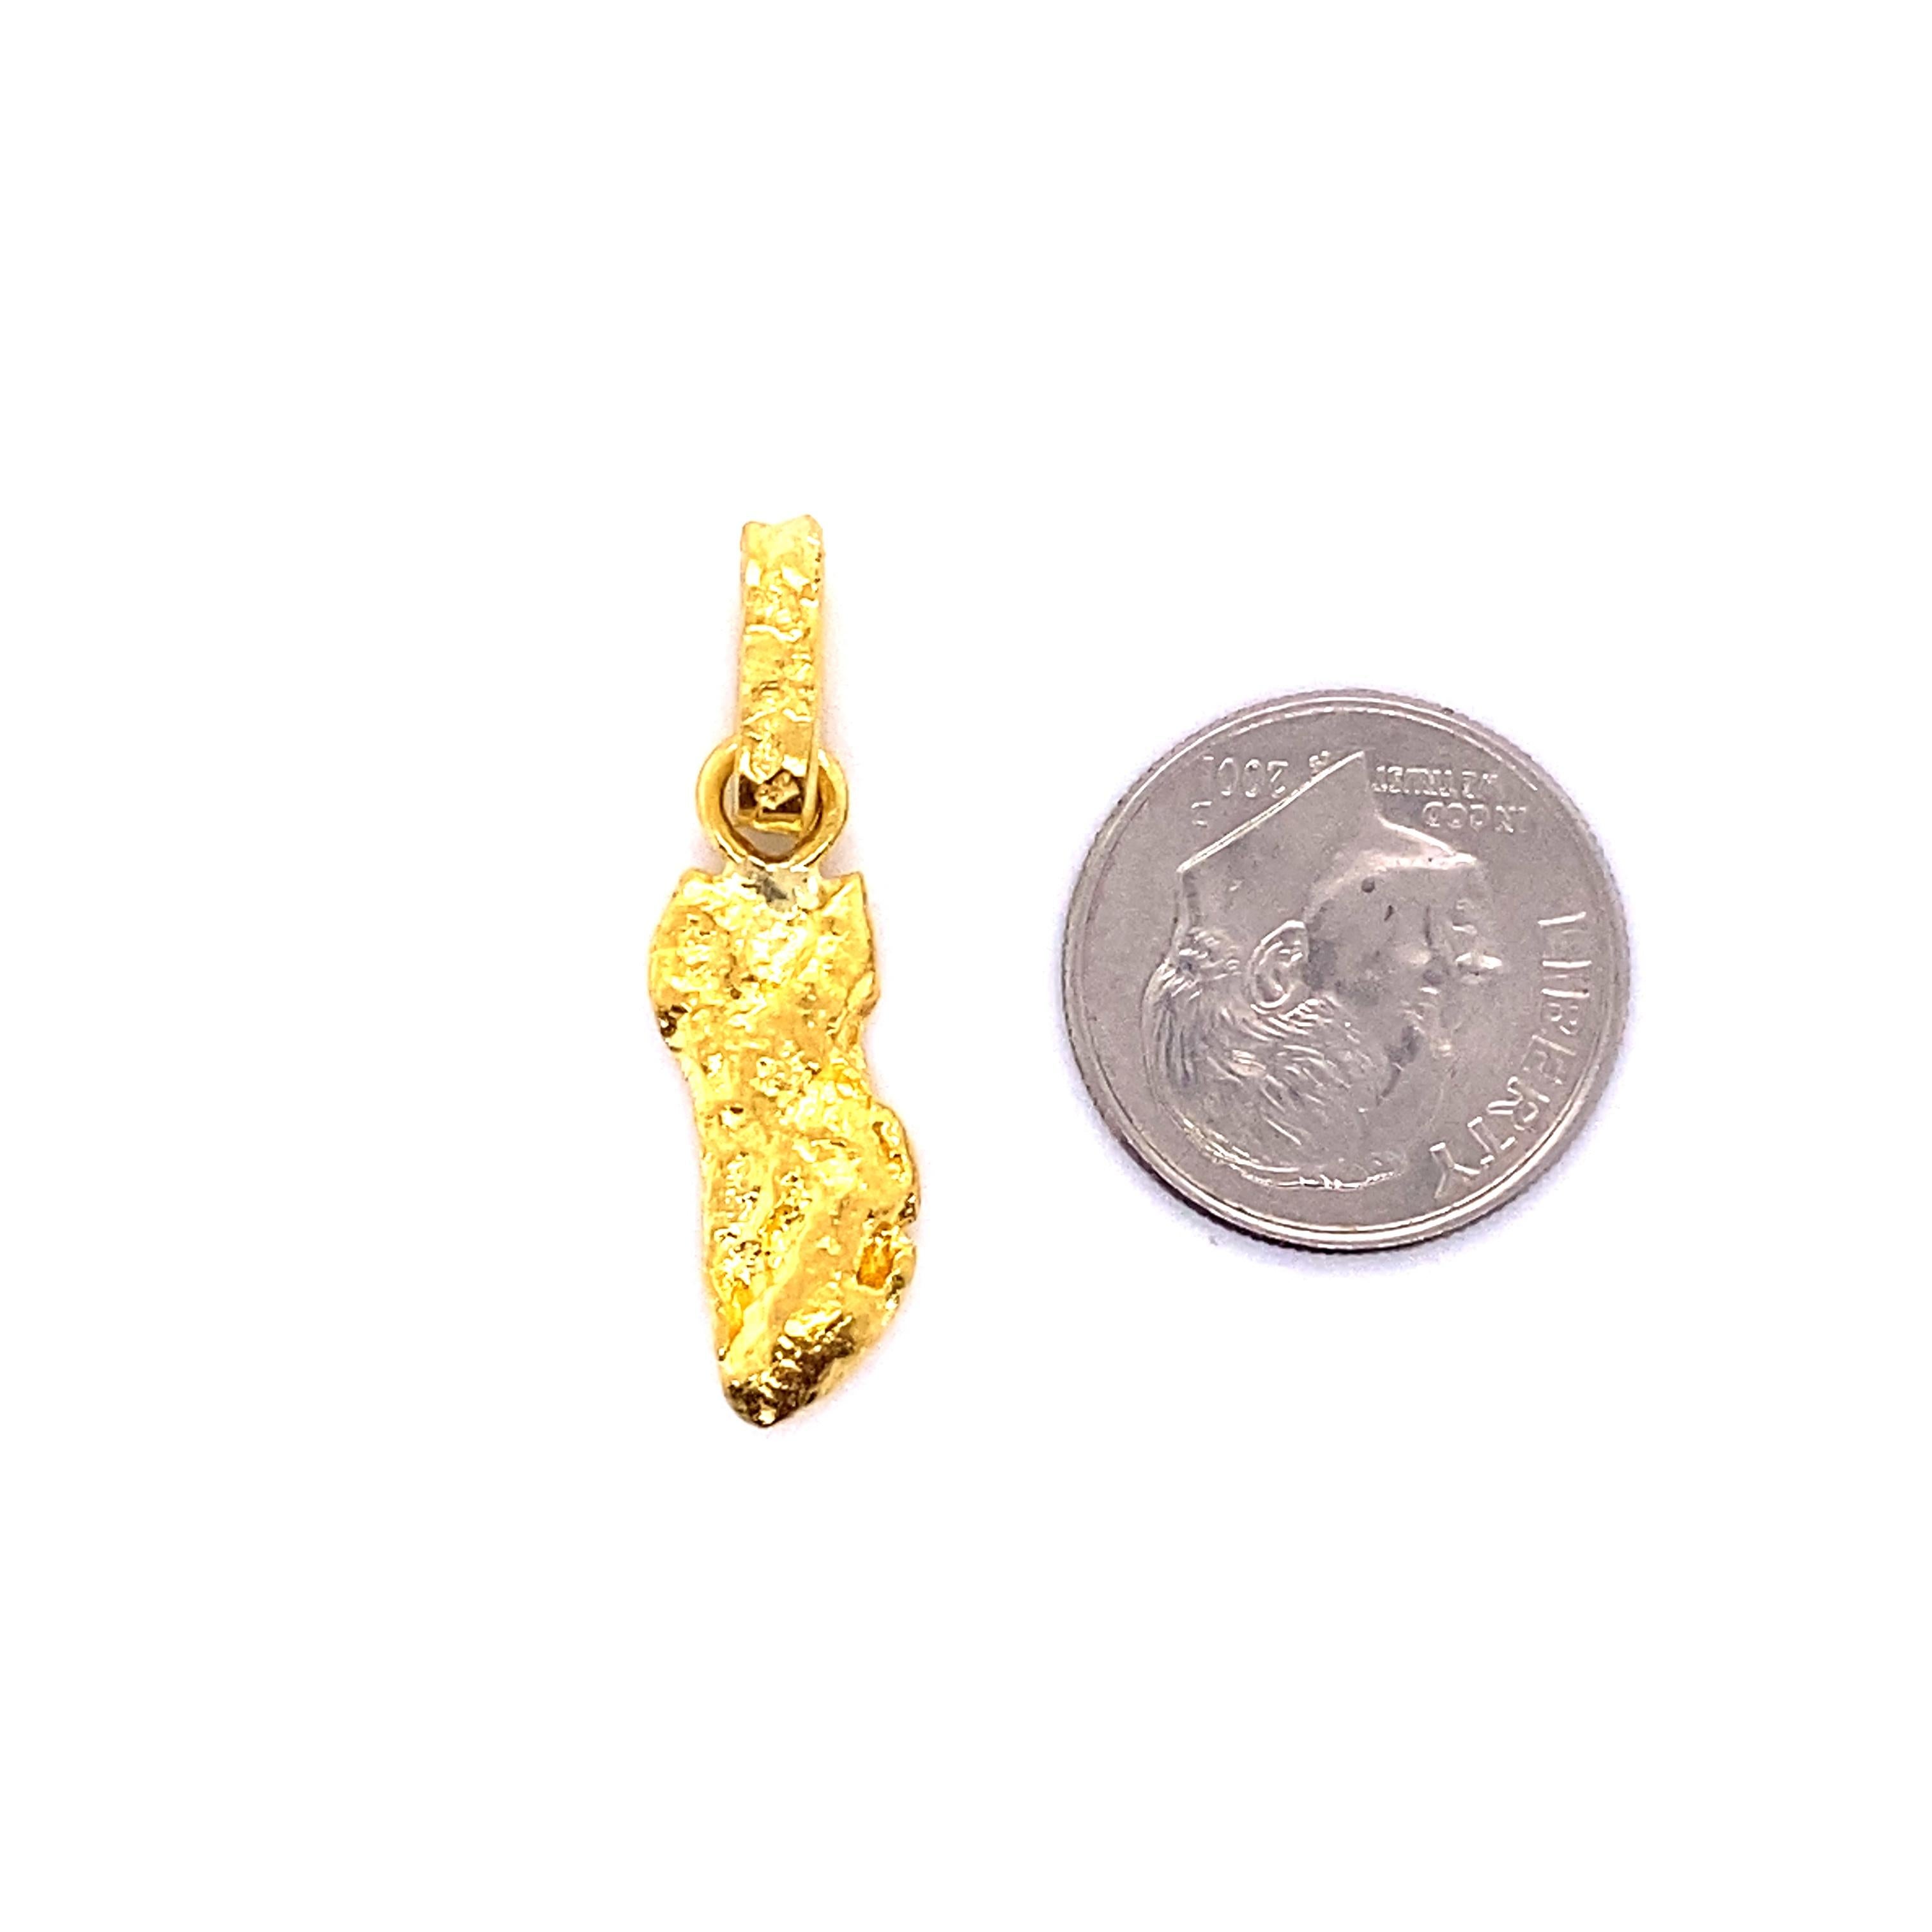 Byzantine Raw, Solid, 24k Yellow Golden Nugget Pendant, 3.9 Grams from Australia For Sale